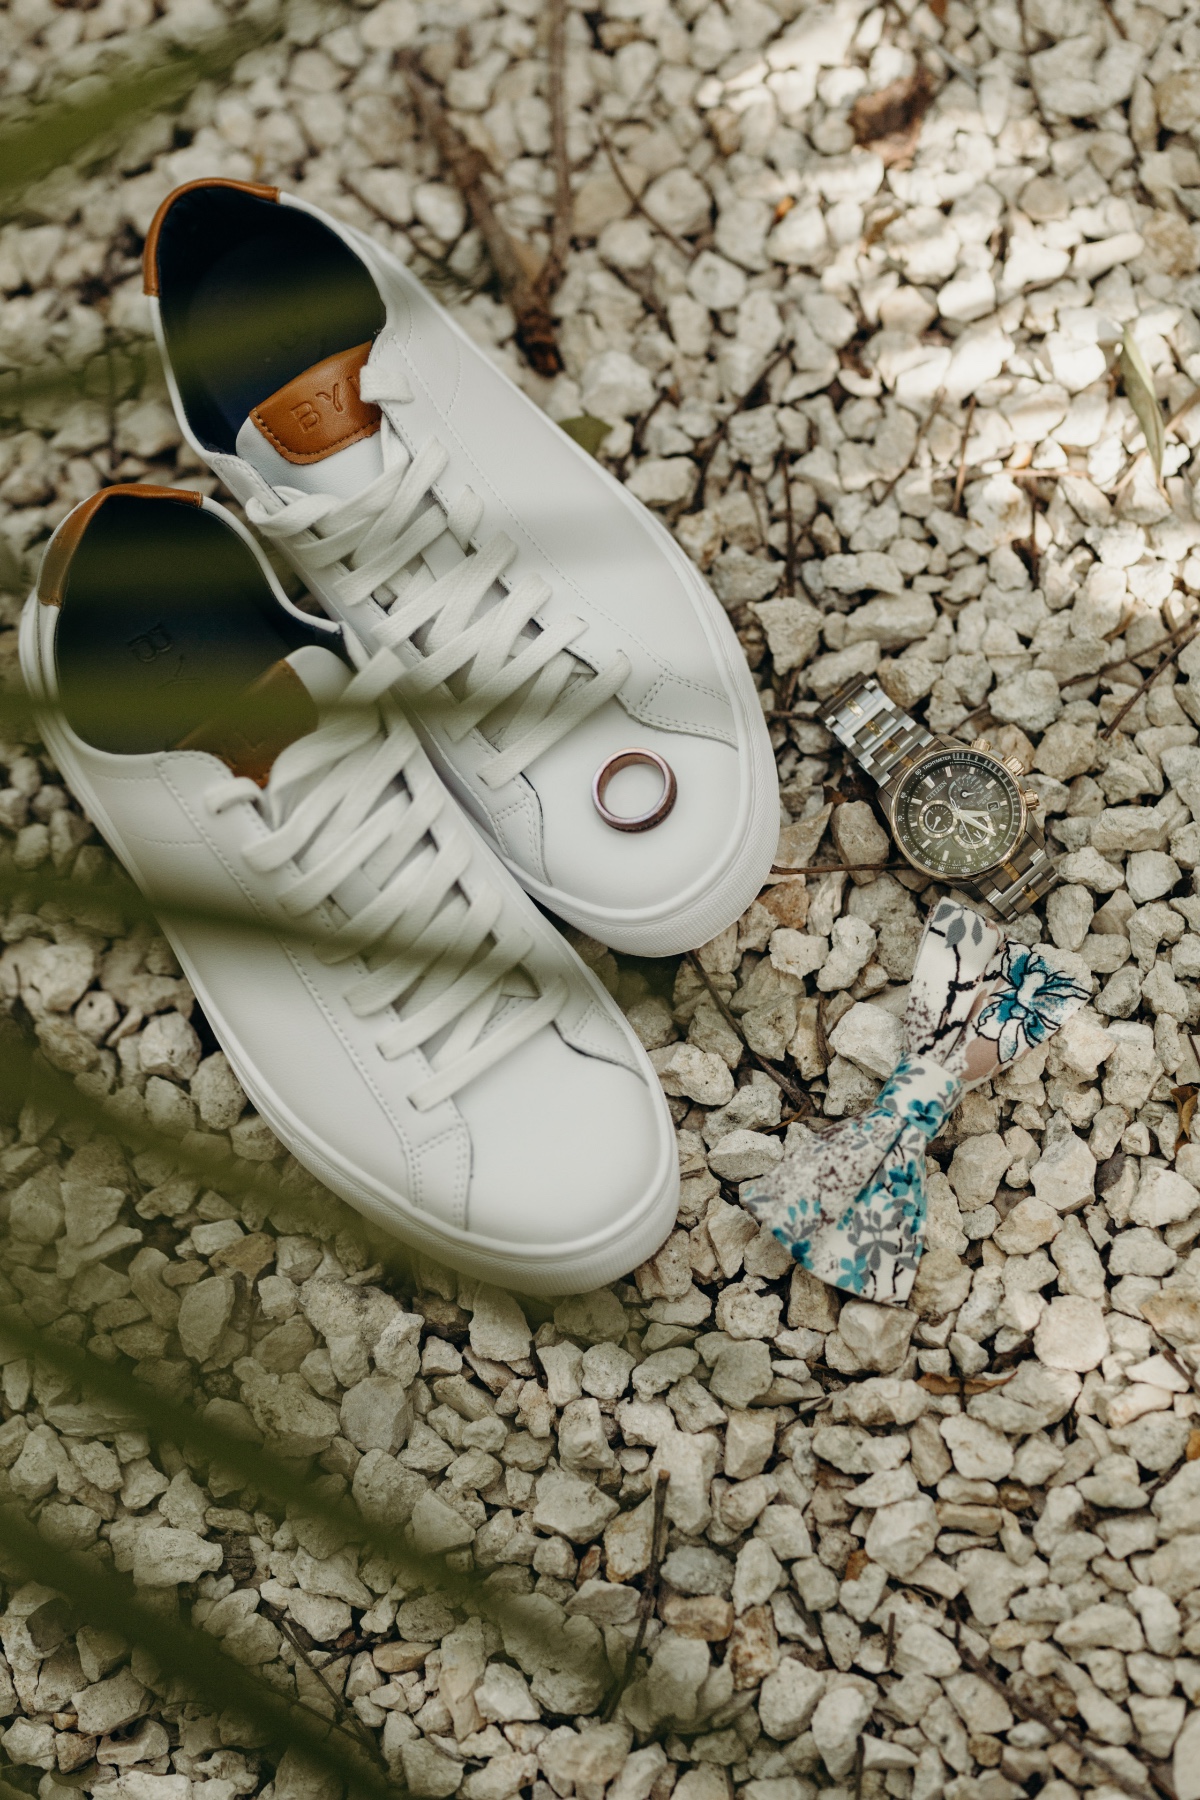 Groom's sneakers, watch, wedding band, and bow tie on rocks